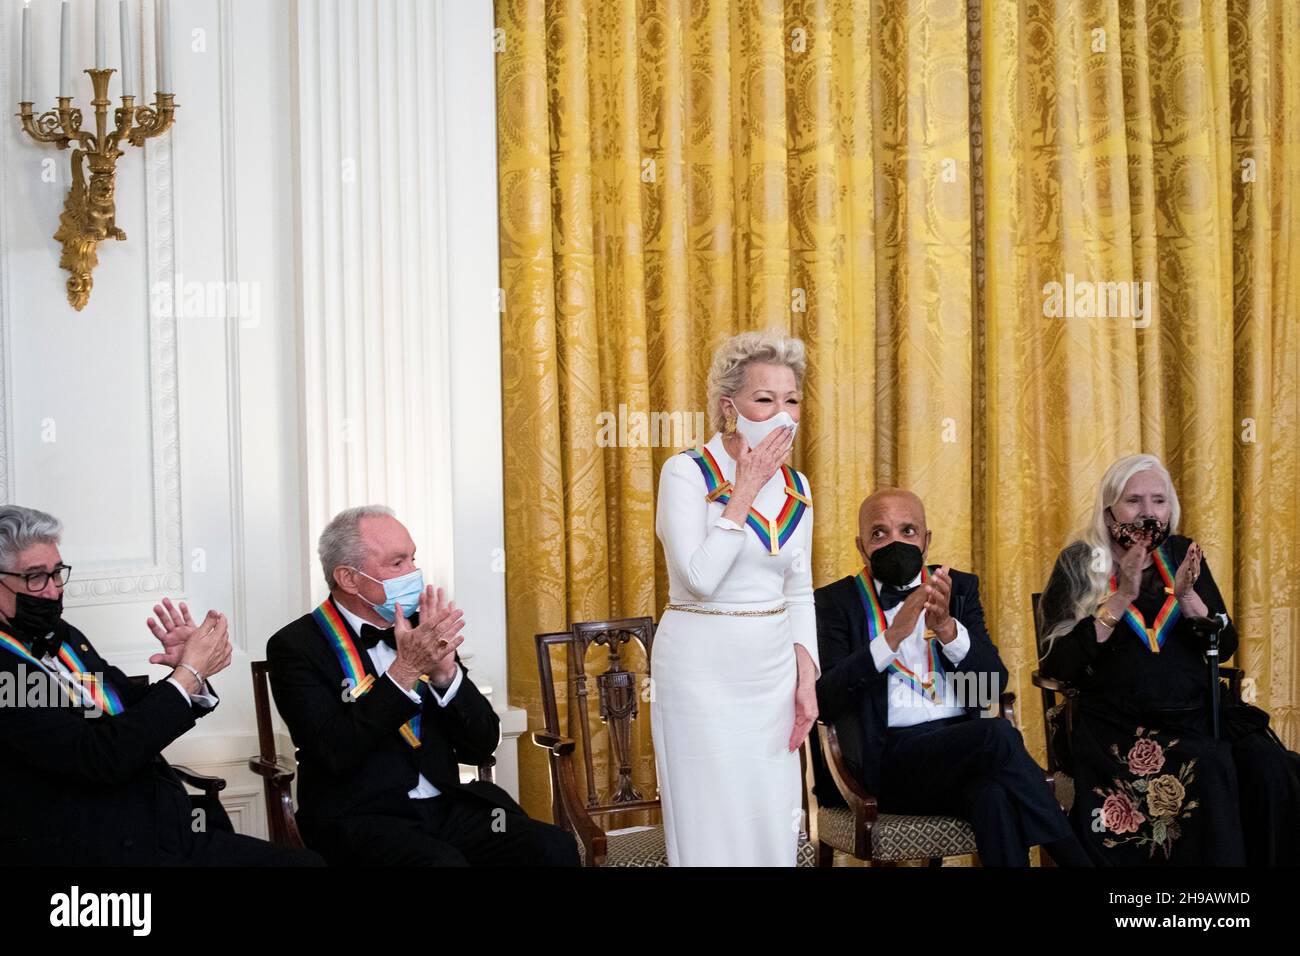 Washington, DC, U.S., on Sunday, Dec. 5, 2021. Actress Bette Midler stands while being recognized by U.S. President Joe Biden, not pictured, during the Kennedy Center Honorees Reception in the East Room of the White House in Washington, DC, U.S., on Sunday, Dec. 5, 2021. The John F. Kennedy Center for the Performing Arts 44th Honorees for lifetime artistic achievements include operatic bass-baritone Justino Diaz, Motown founder Berry Gordy, Saturday Night Live creator Lorne Michaels, actress Bette Midler, and singer-songwriter Joni Mitchell.Credit: Al Drago/Pool via CNP /MediaPunch Stock Photo